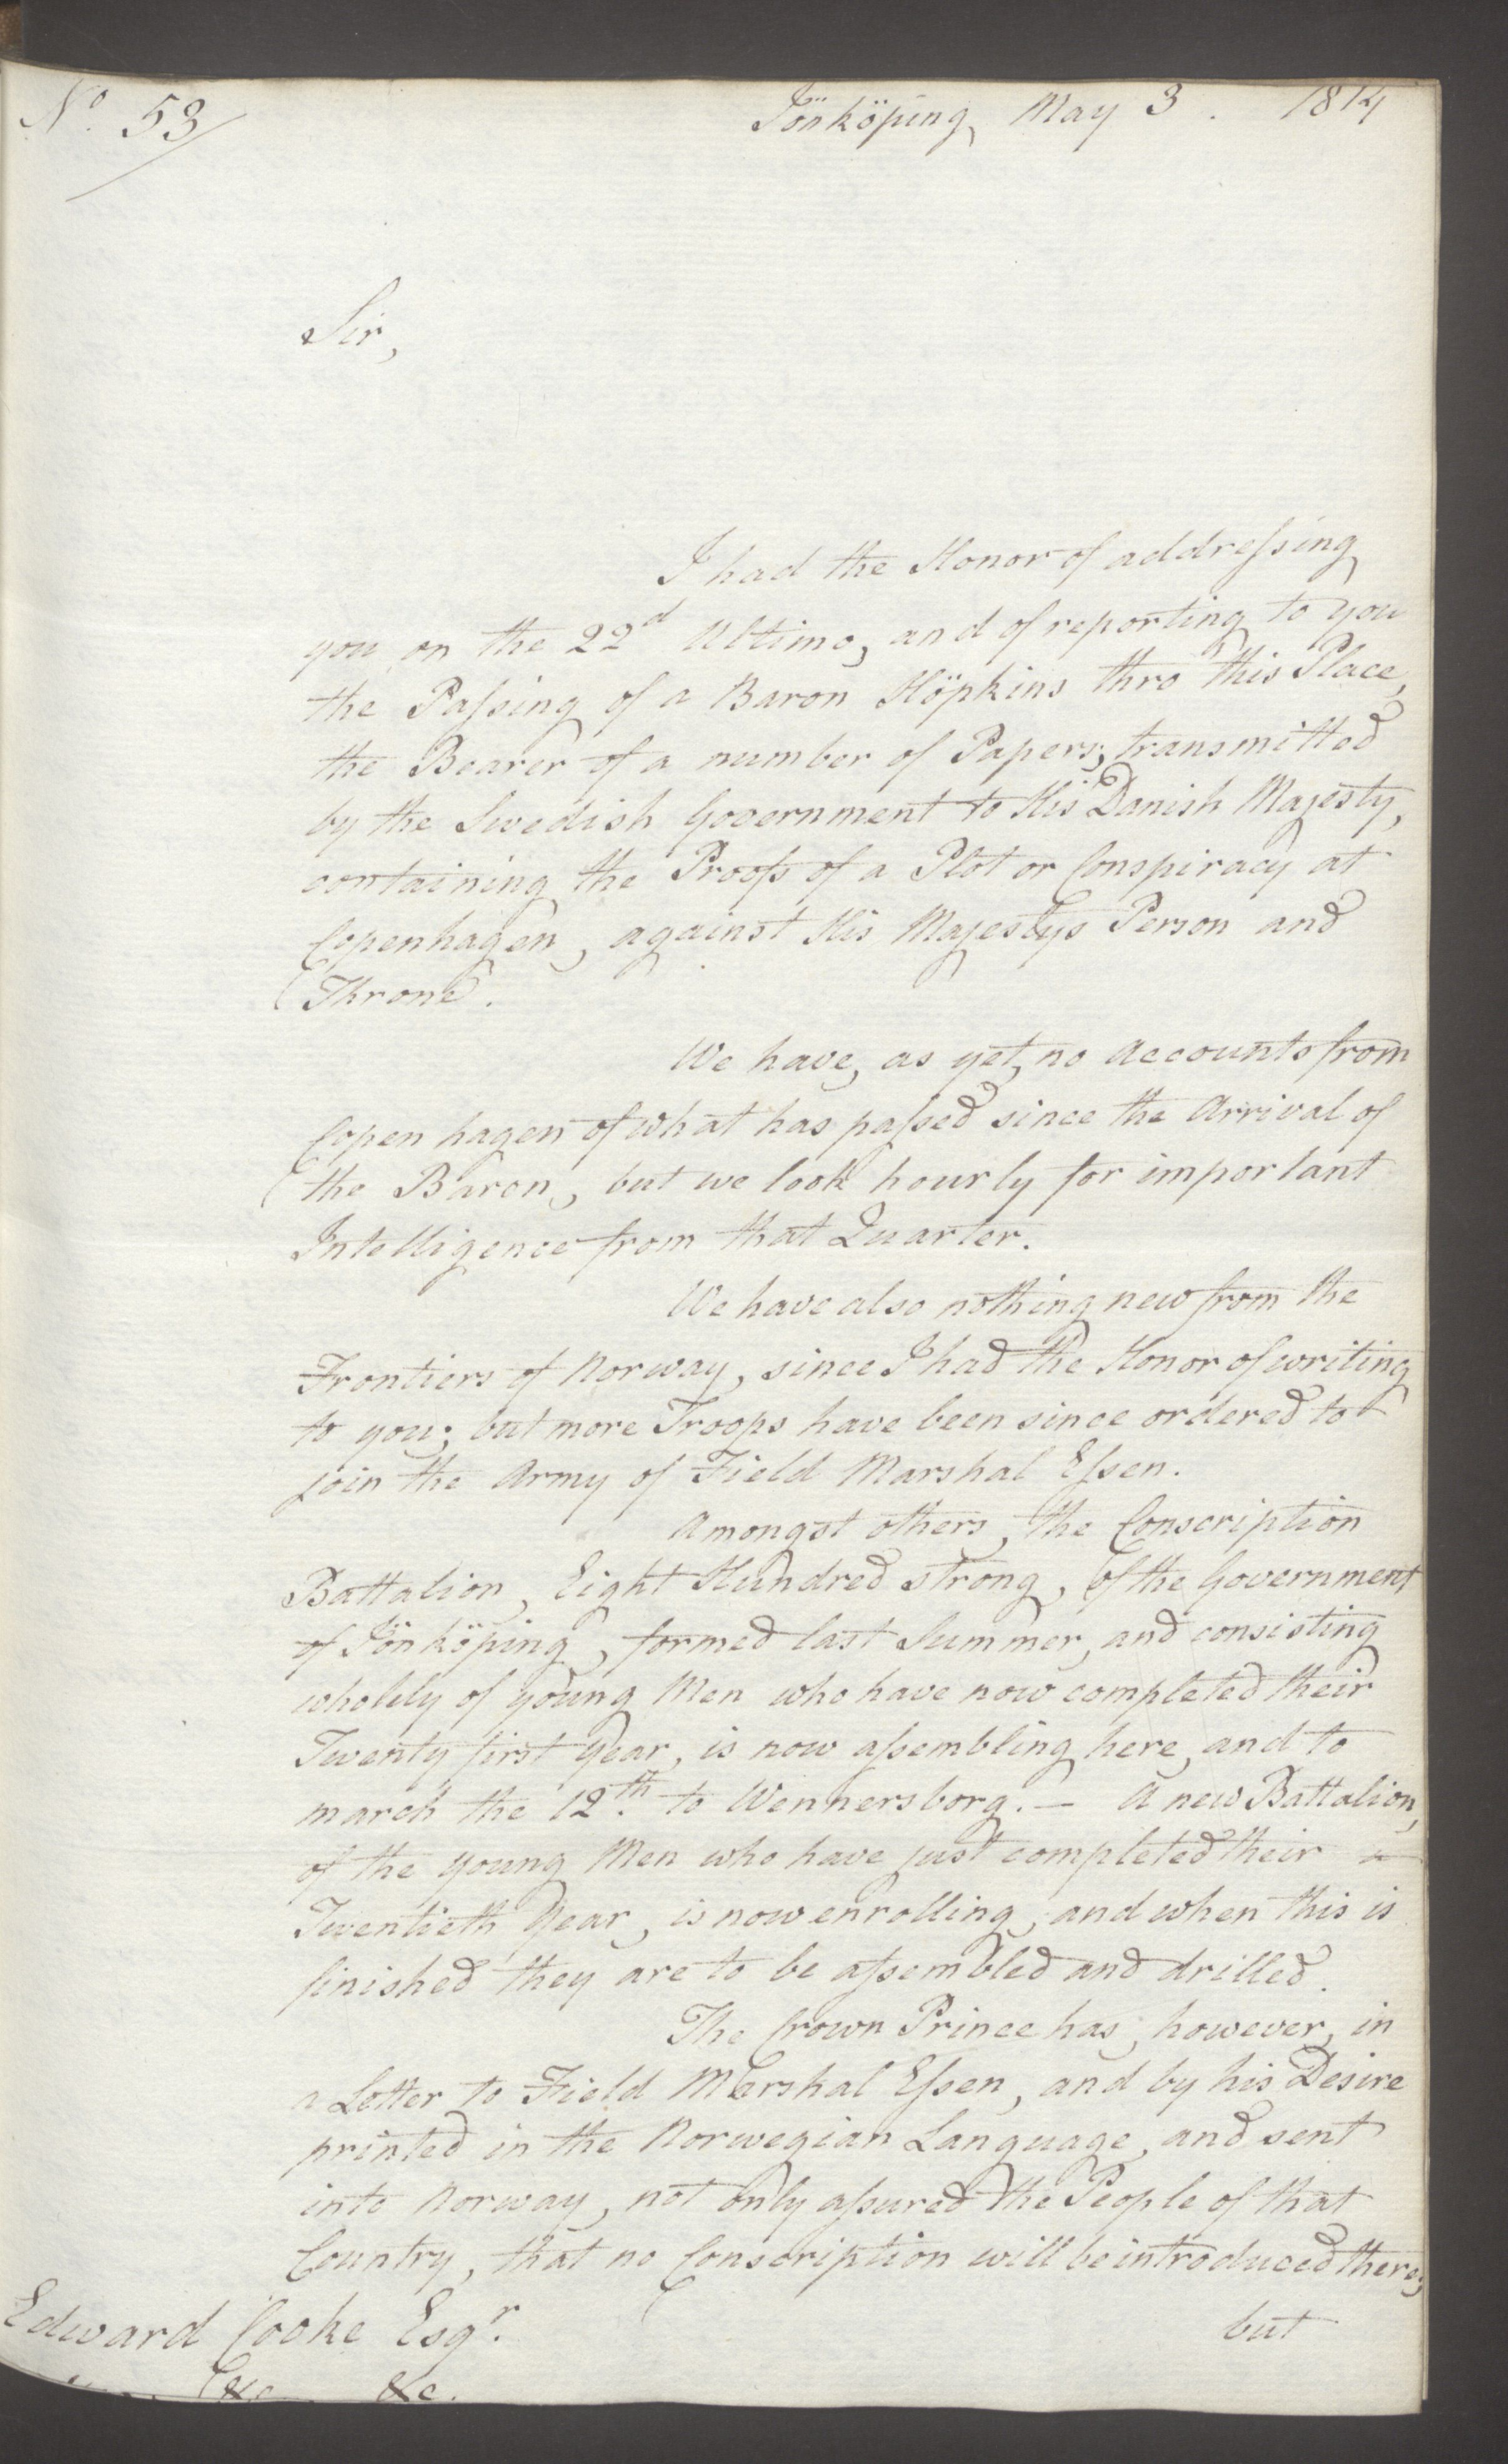 Foreign Office*, UKA/-/FO 38/16: Sir C. Gordon. Reports from Malmö, Jonkoping, and Helsingborg, 1814, p. 38